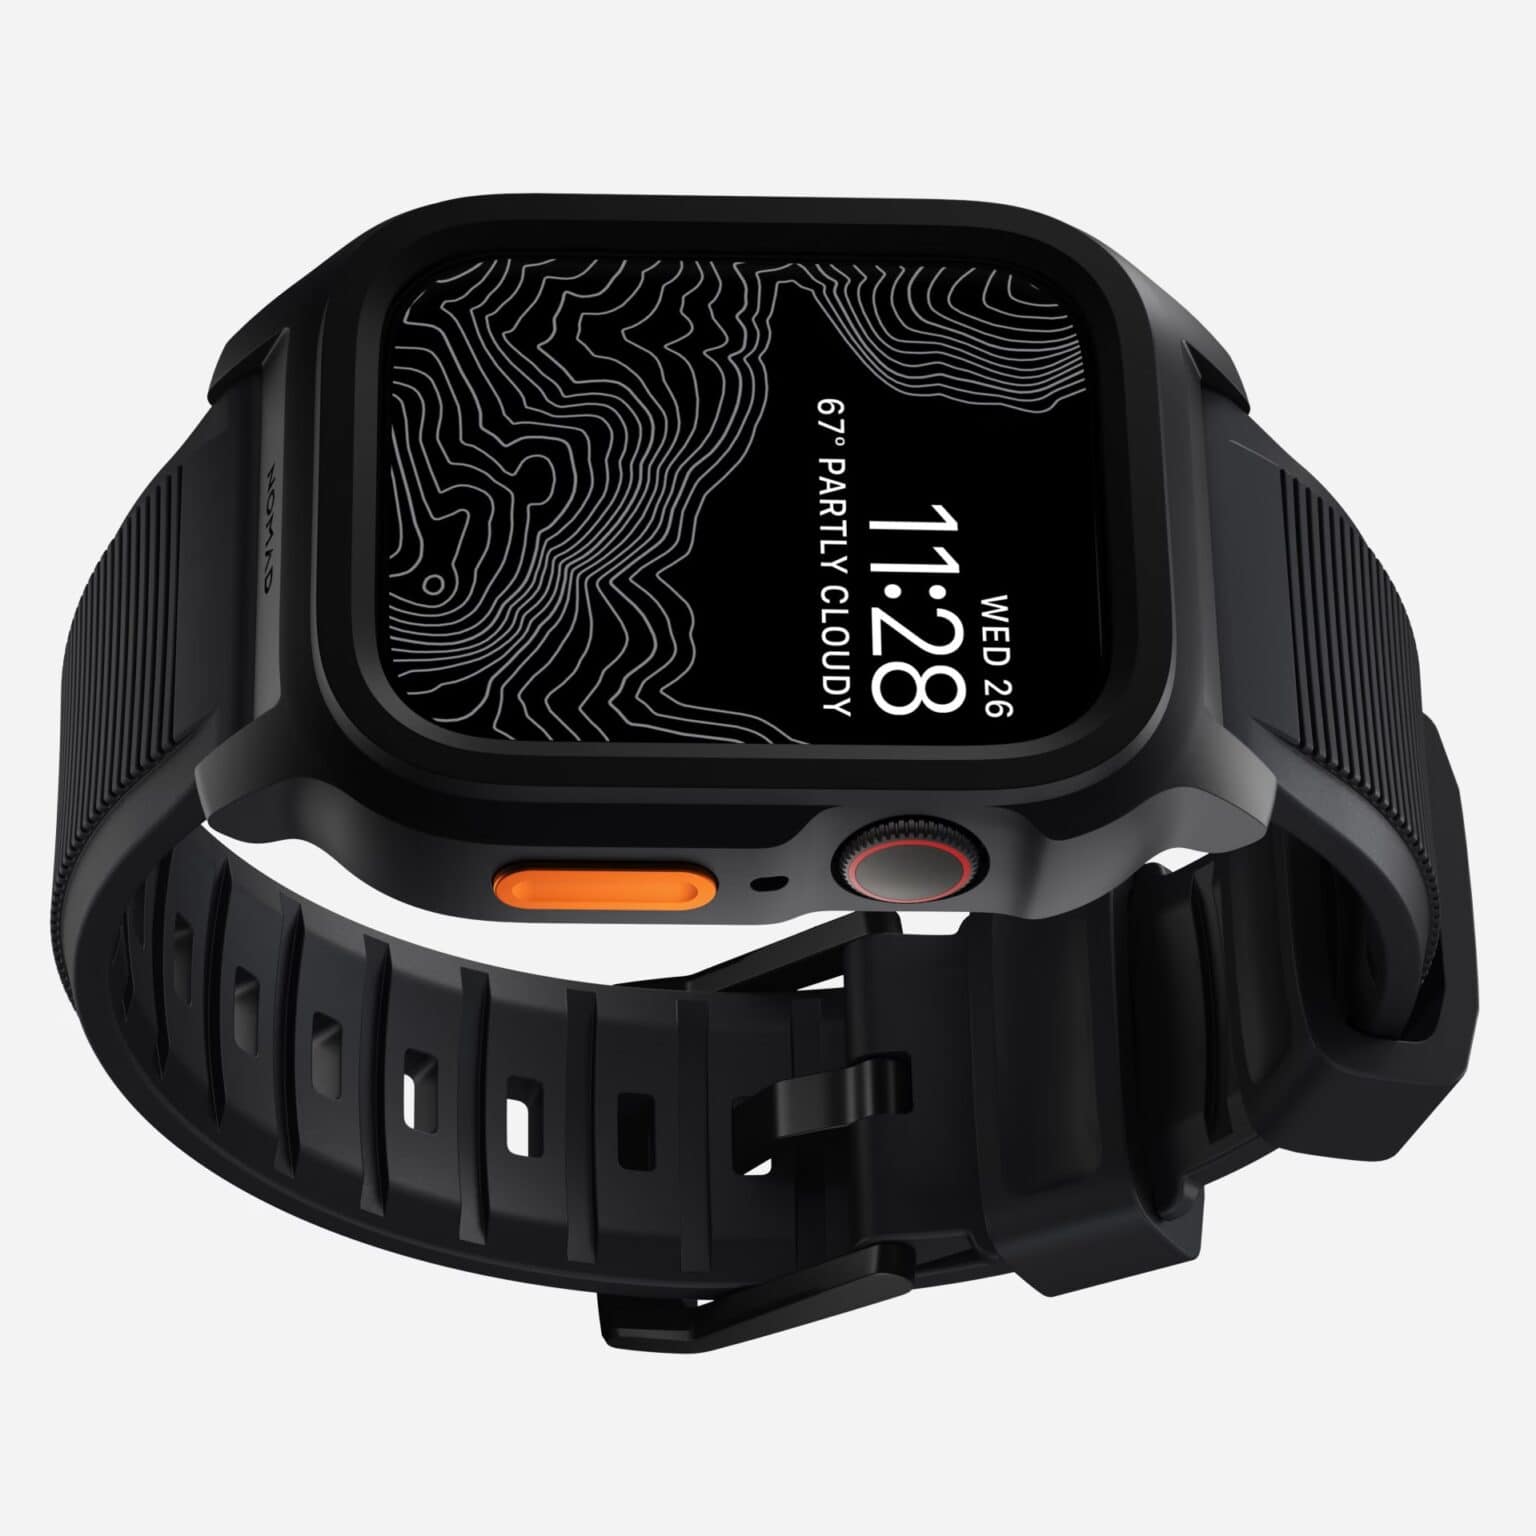 The orange button alone suggests Apple Watch Ultra, even though it's not.